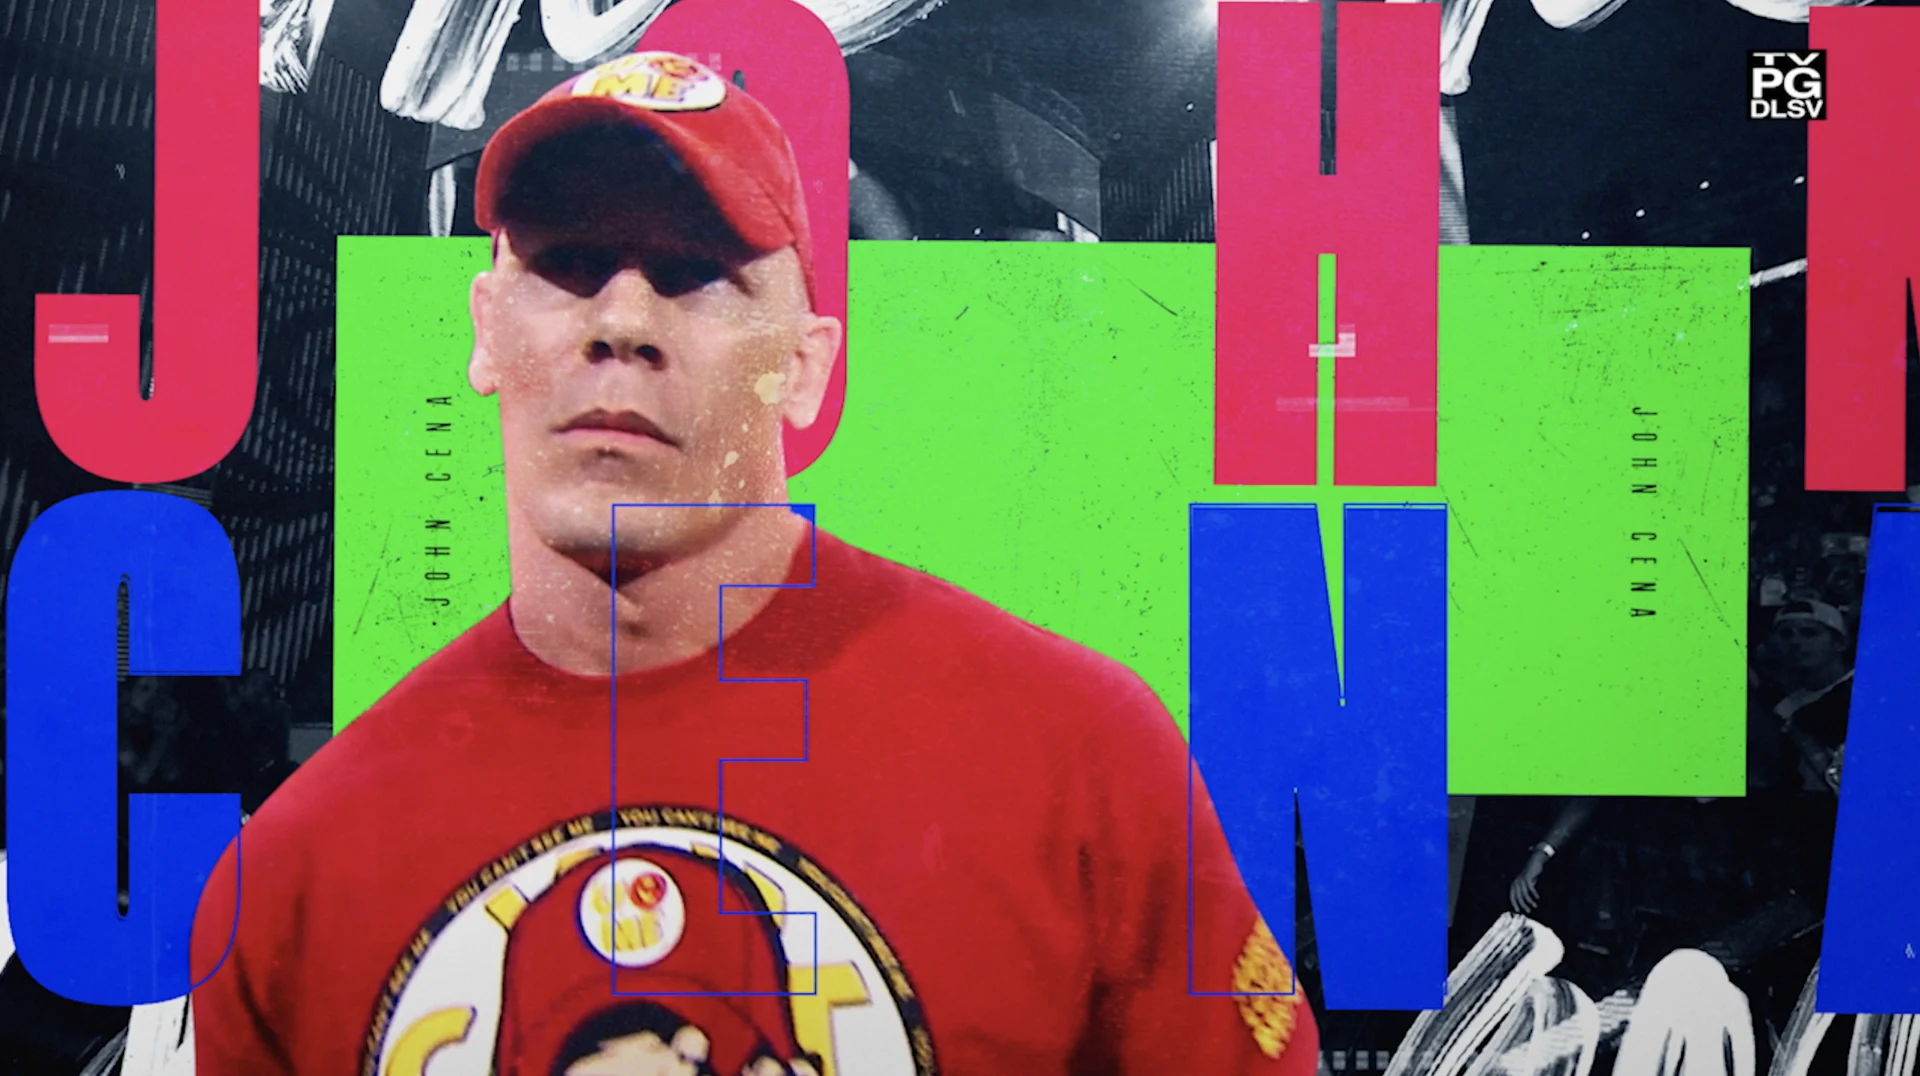 We designed a promotional campaign to tout WWE legend John Cena’s appearances in The Summer of Cena, and feature other elements of the events, including other wrestlers and city-specific sponsors.